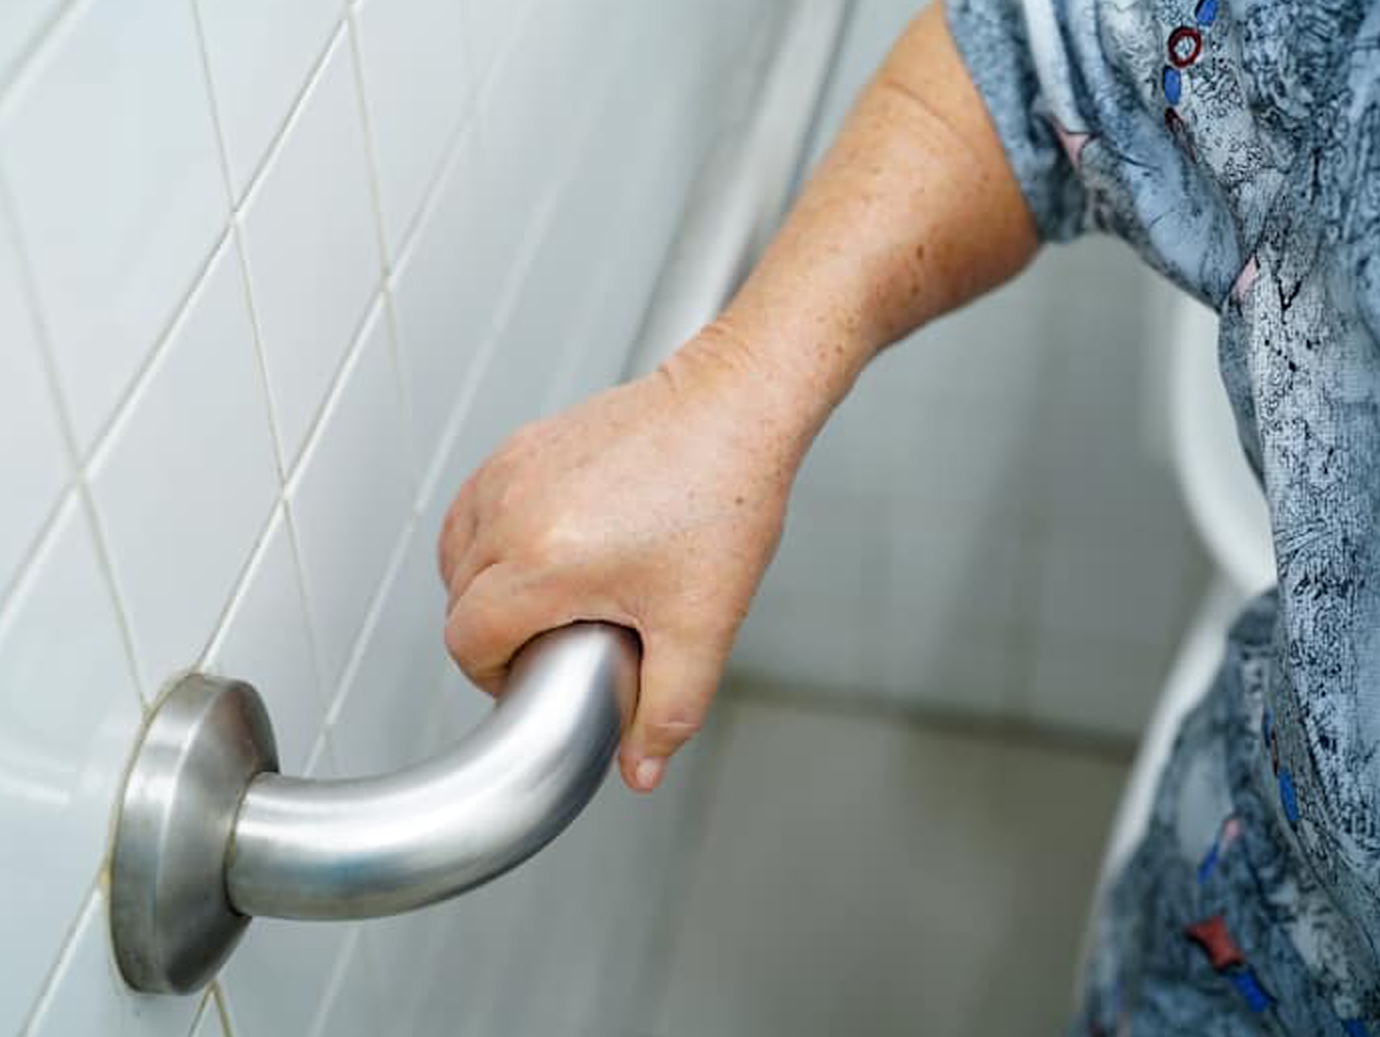 Close-up of an elderly person holding a hand-rail in a restroom 